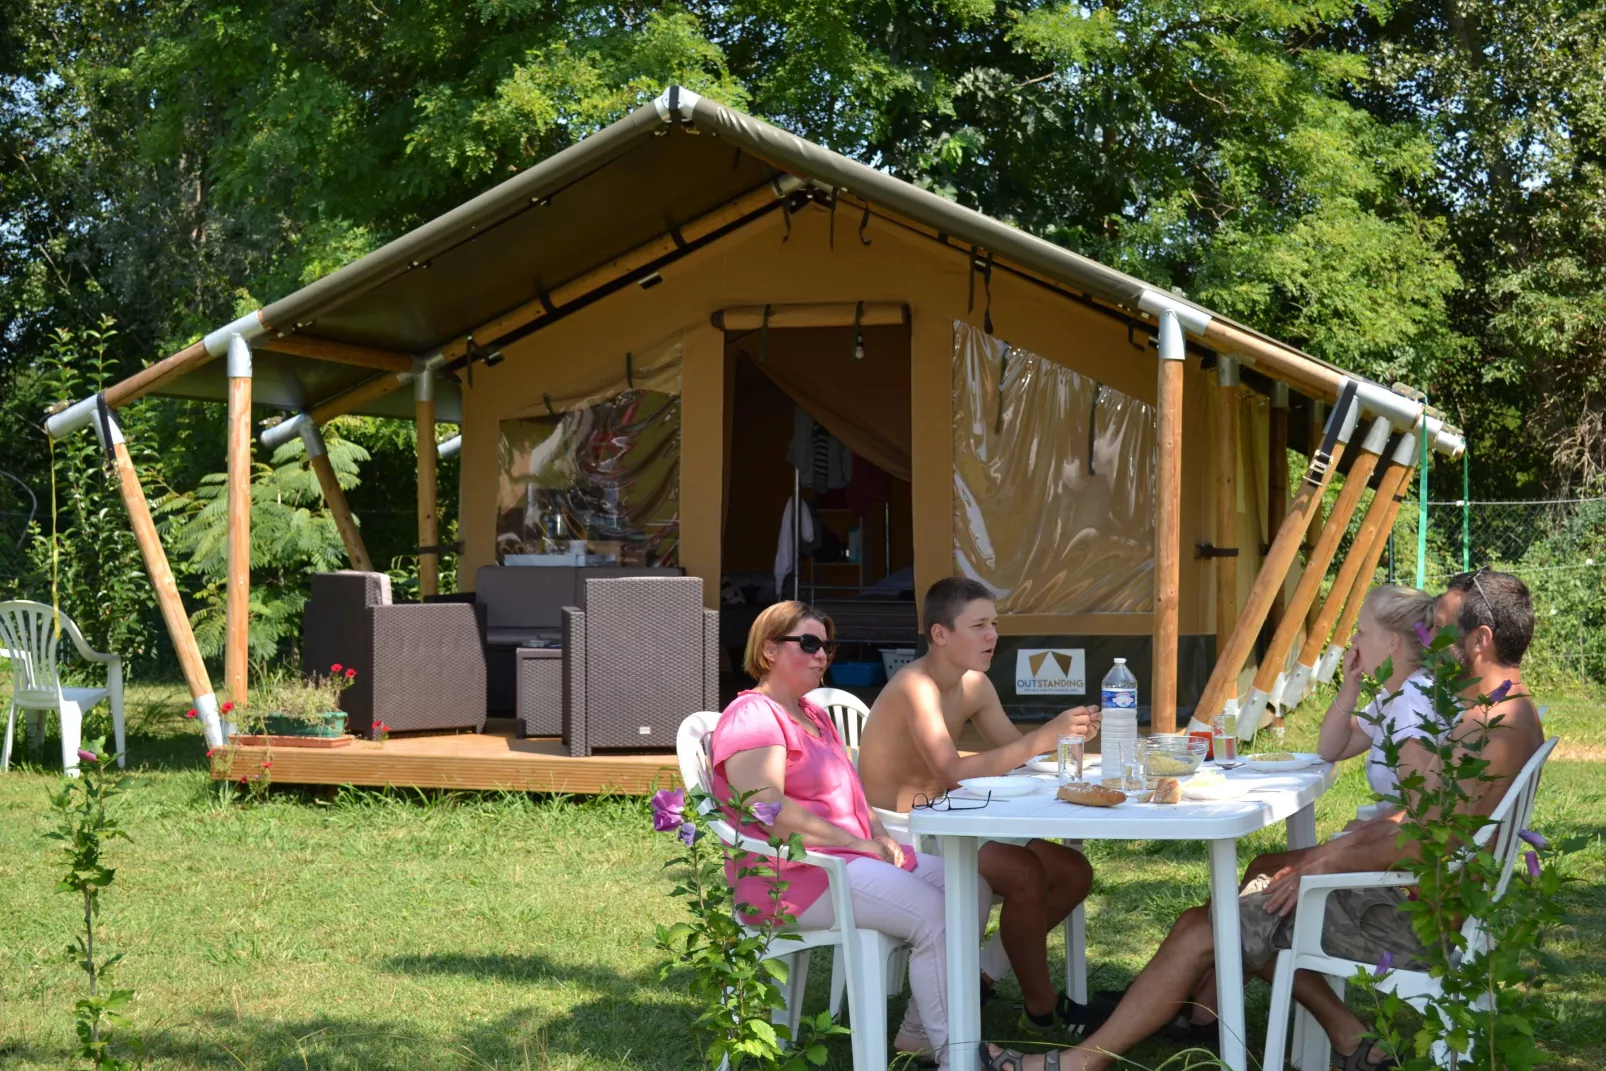 Camping Les Eychecadous